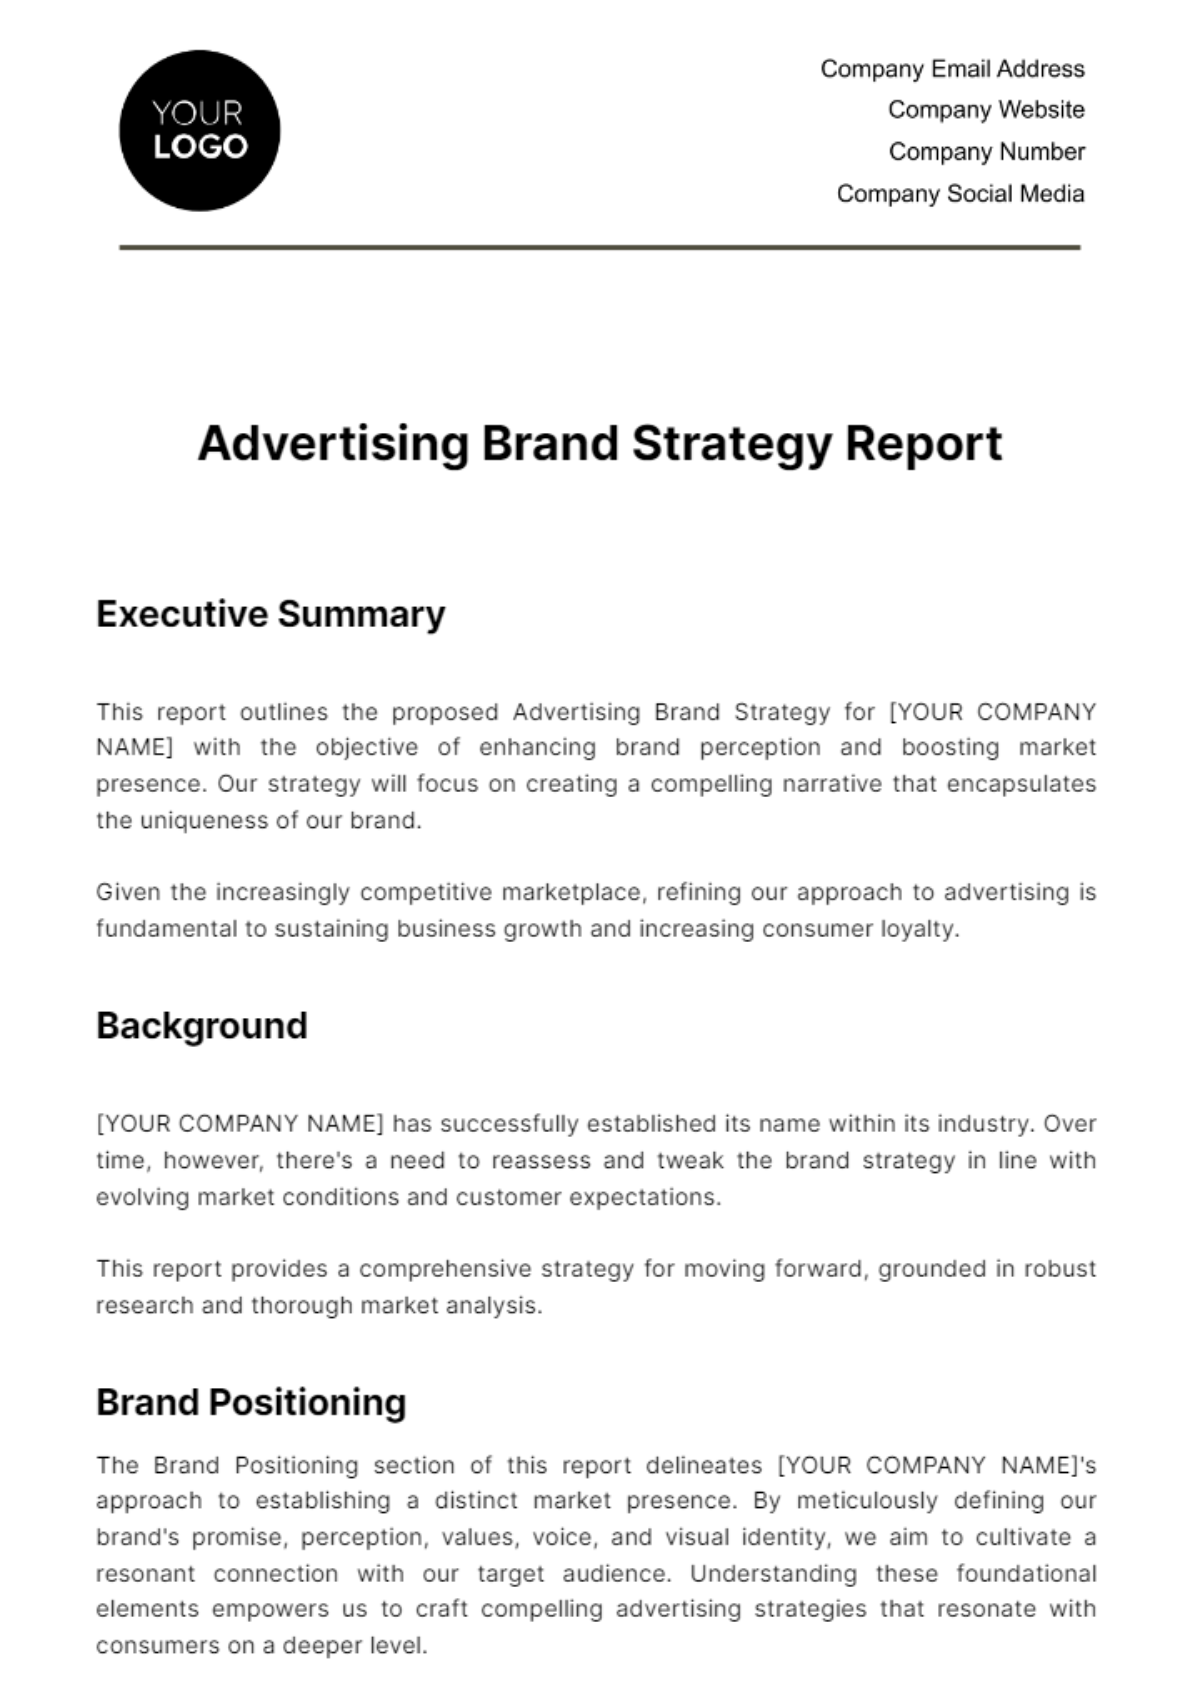 Advertising Brand Strategy Report Template